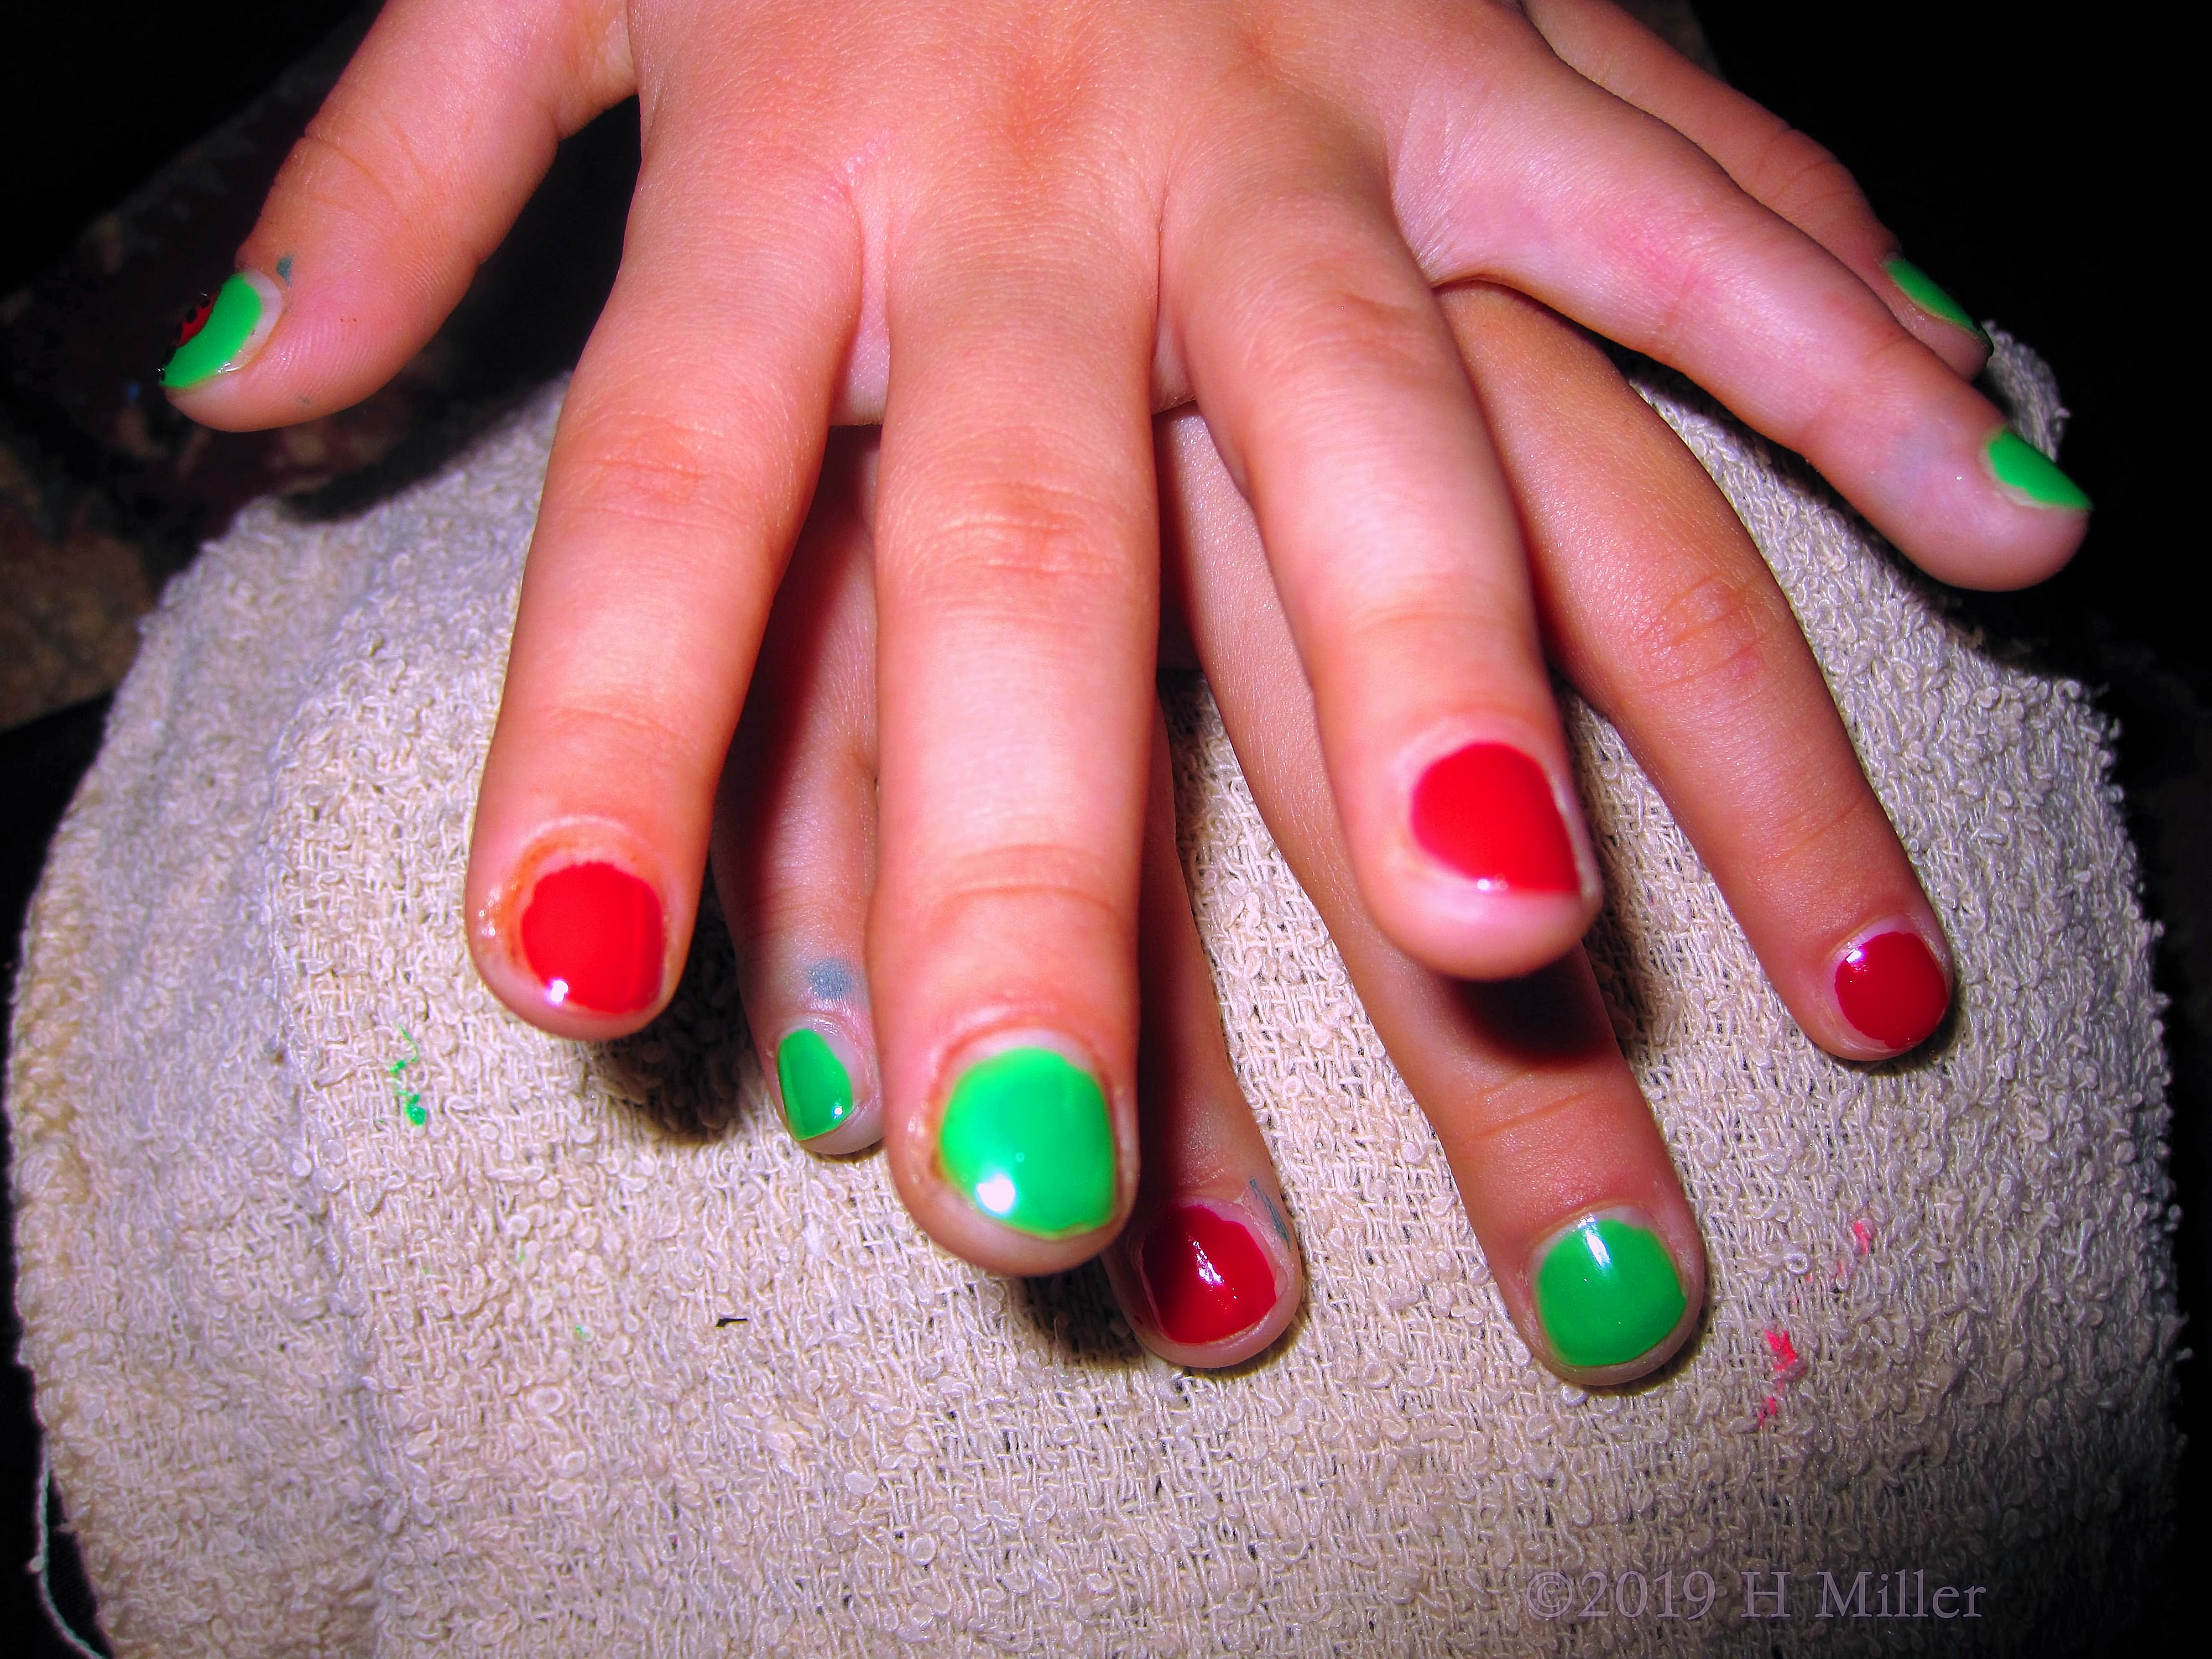 Seasonal Things! Kids Party Guest Gets Red And Green Polish On Her Kids Mani! 